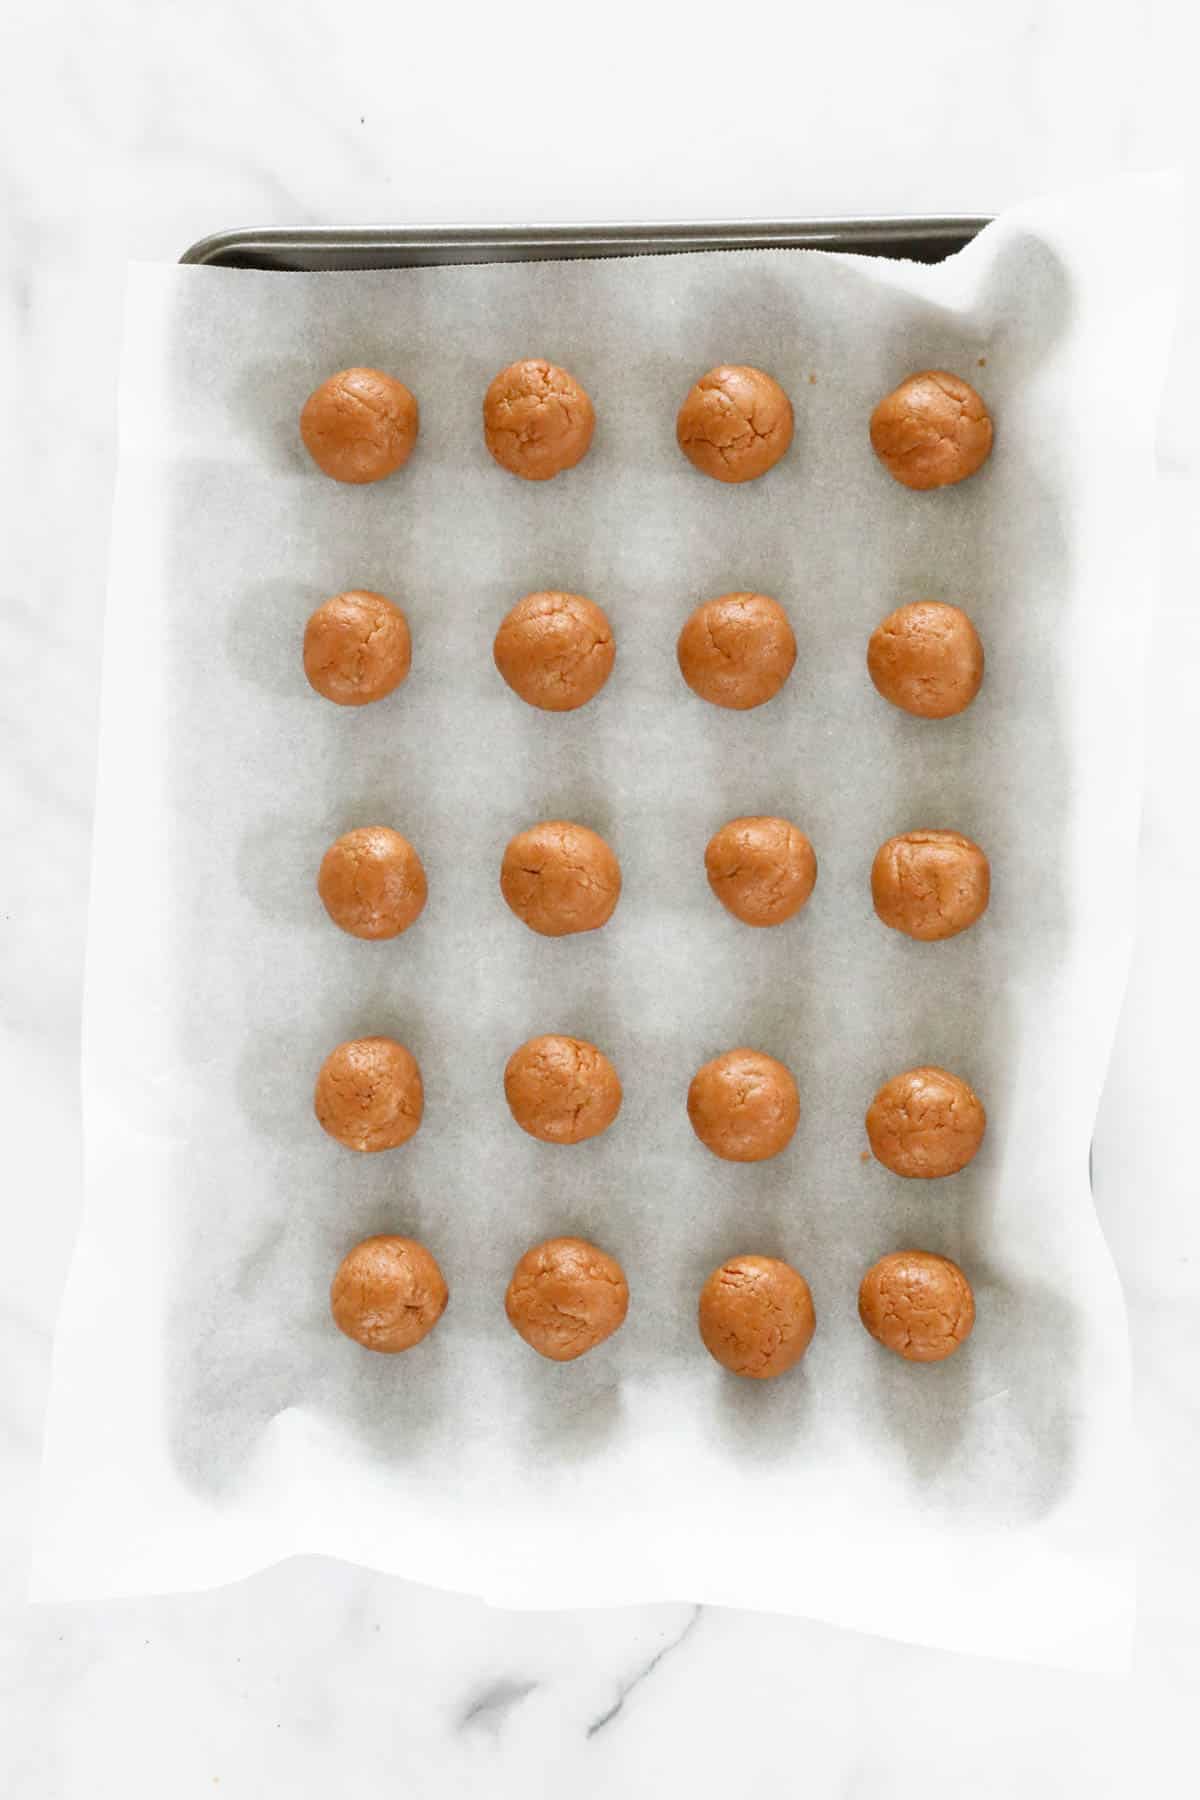 Rolled balls placed on a tray lined with baking paper.